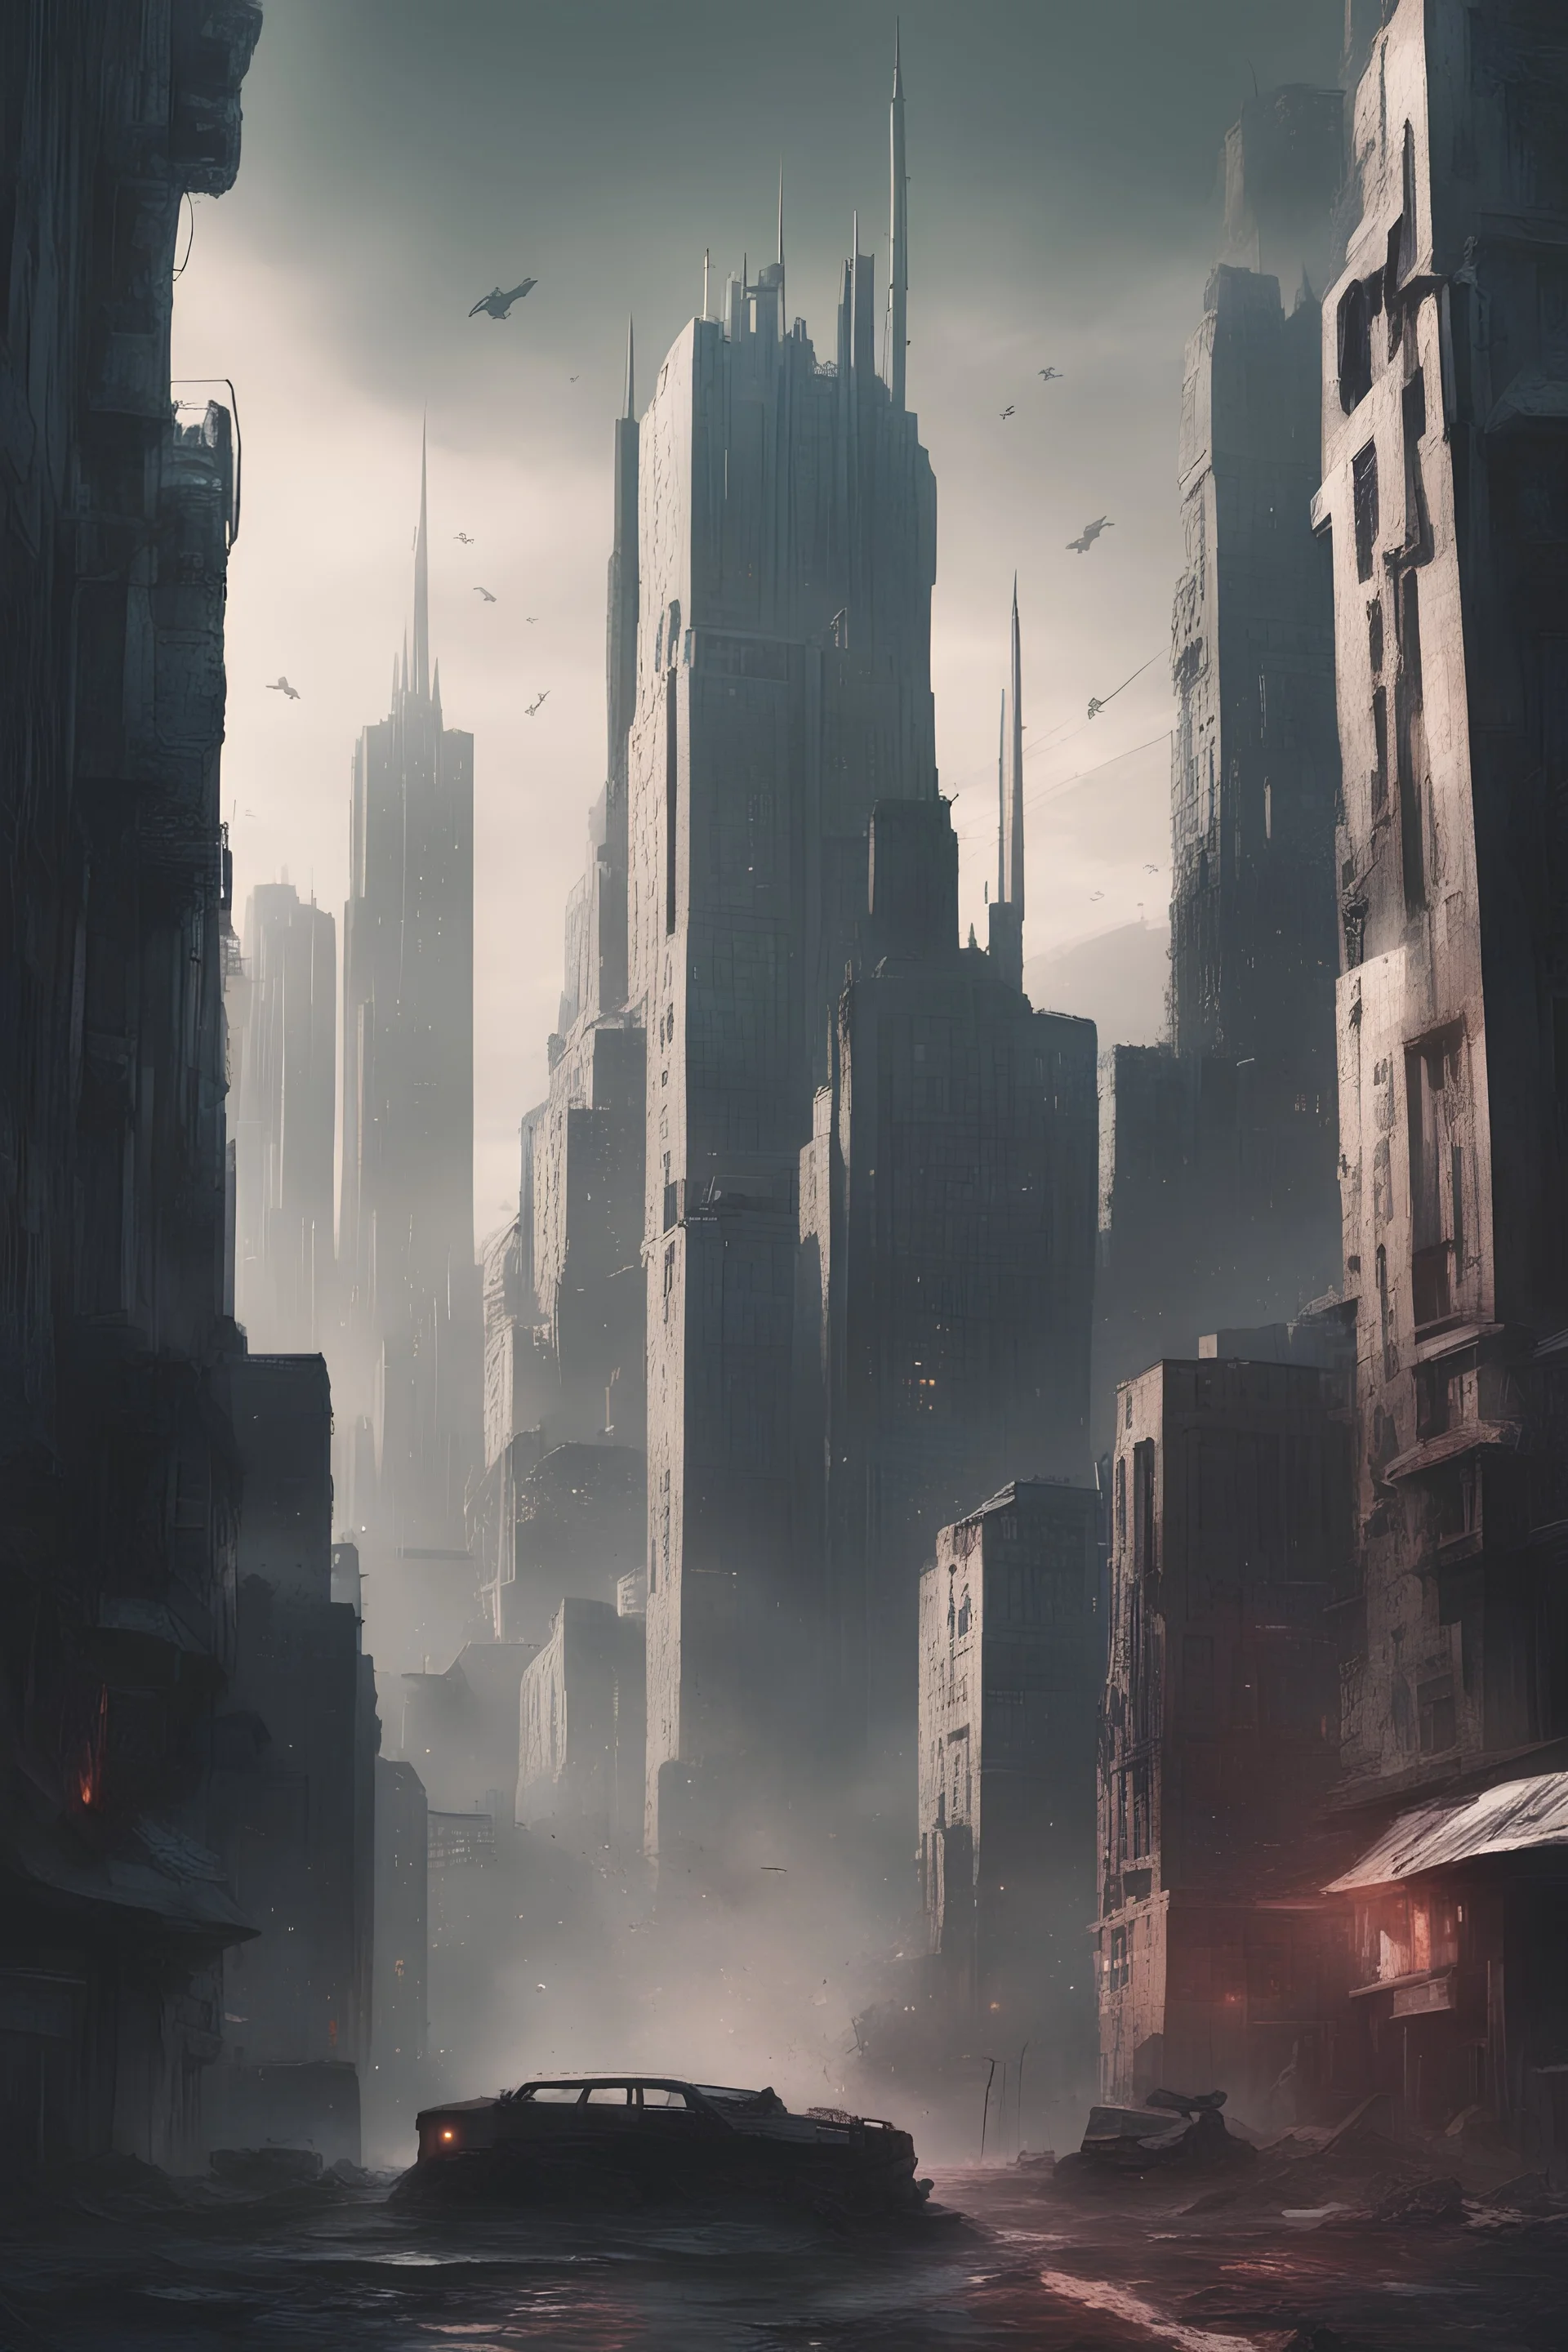 Dystopian art poster for a book about a fictional city